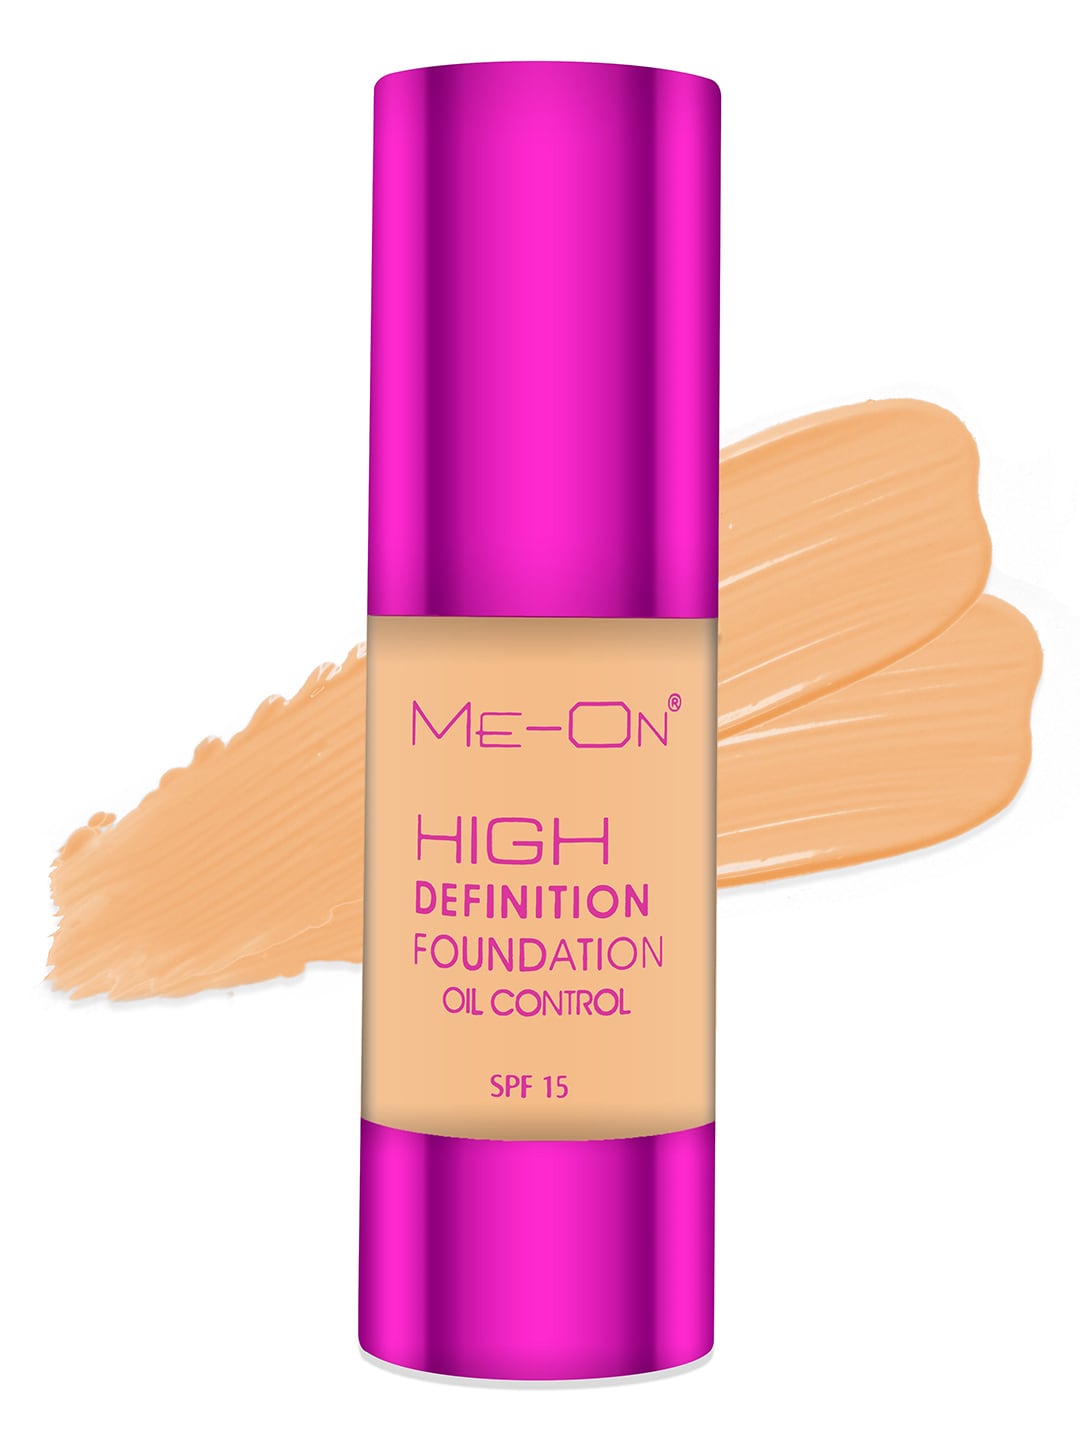 ME-ON High Definition Oil Control SPF15 Foundation - Shade 21 Price in India